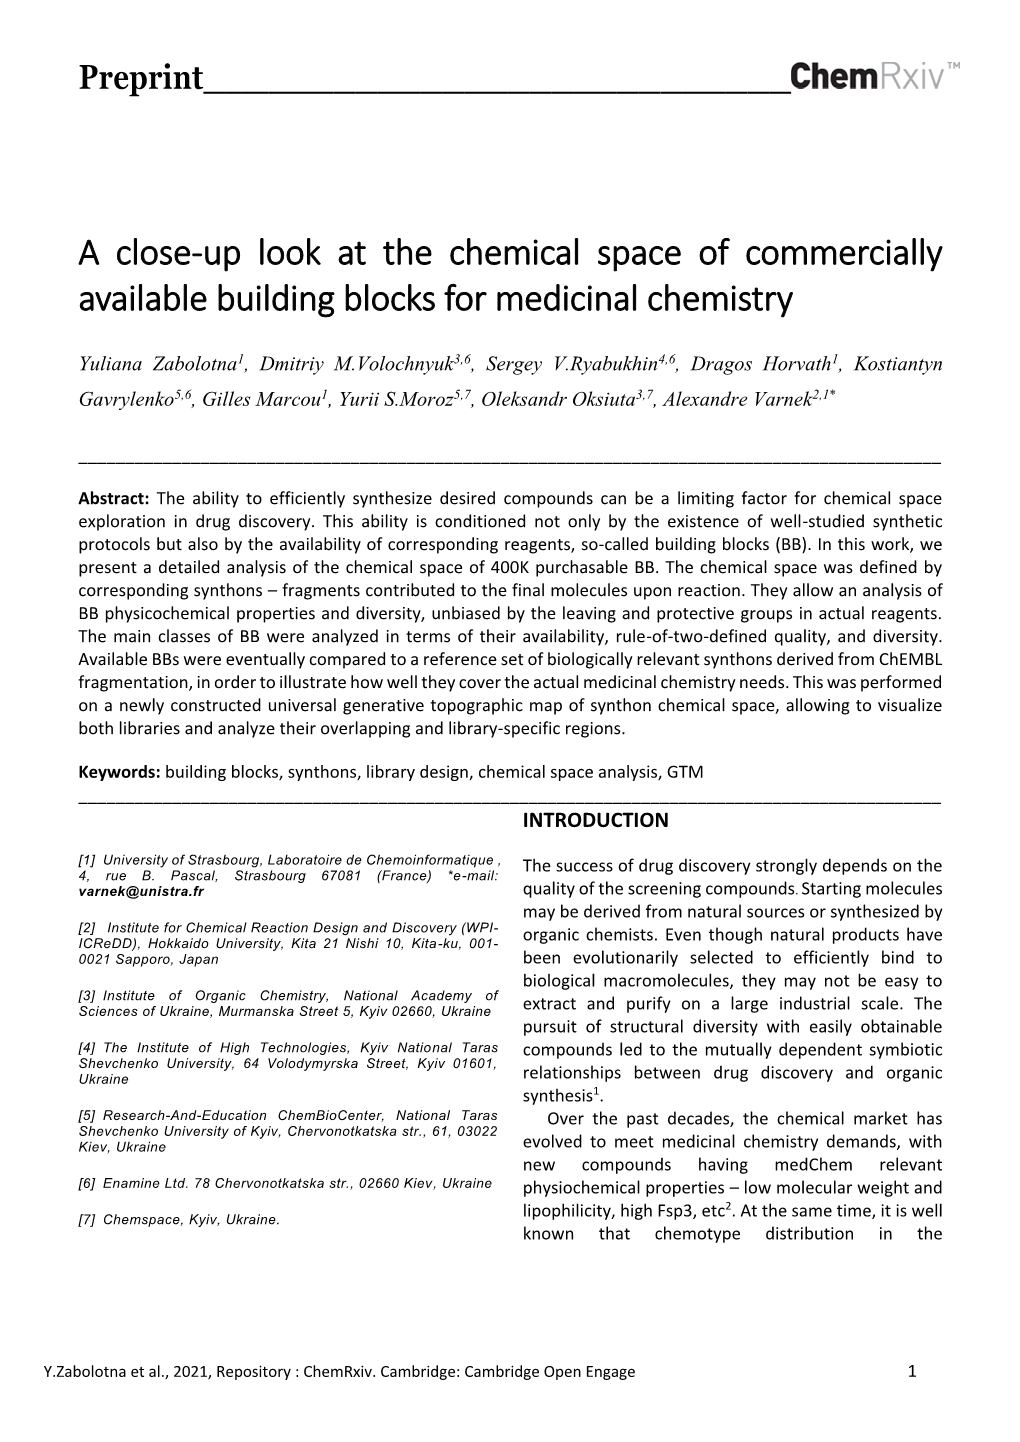 A Close-Up Look at the Chemical Space of Commercially Available Building Blocks for Medicinal Chemistry